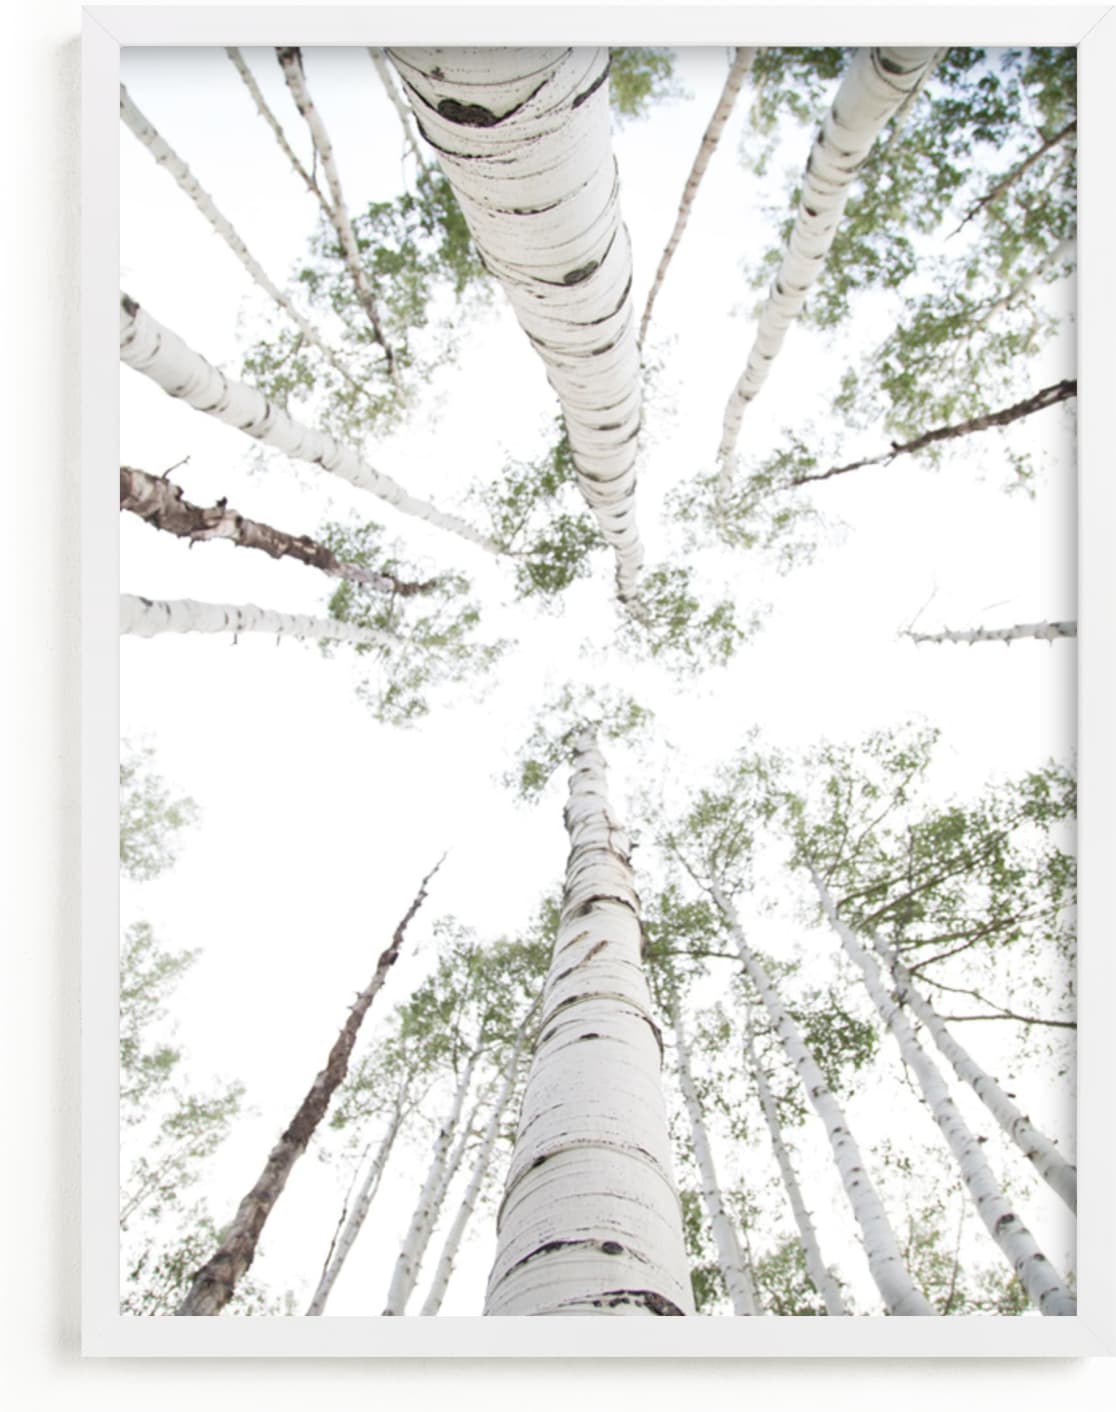 This is a blue art by Kaleb Nimz called Aspens at Altitude.